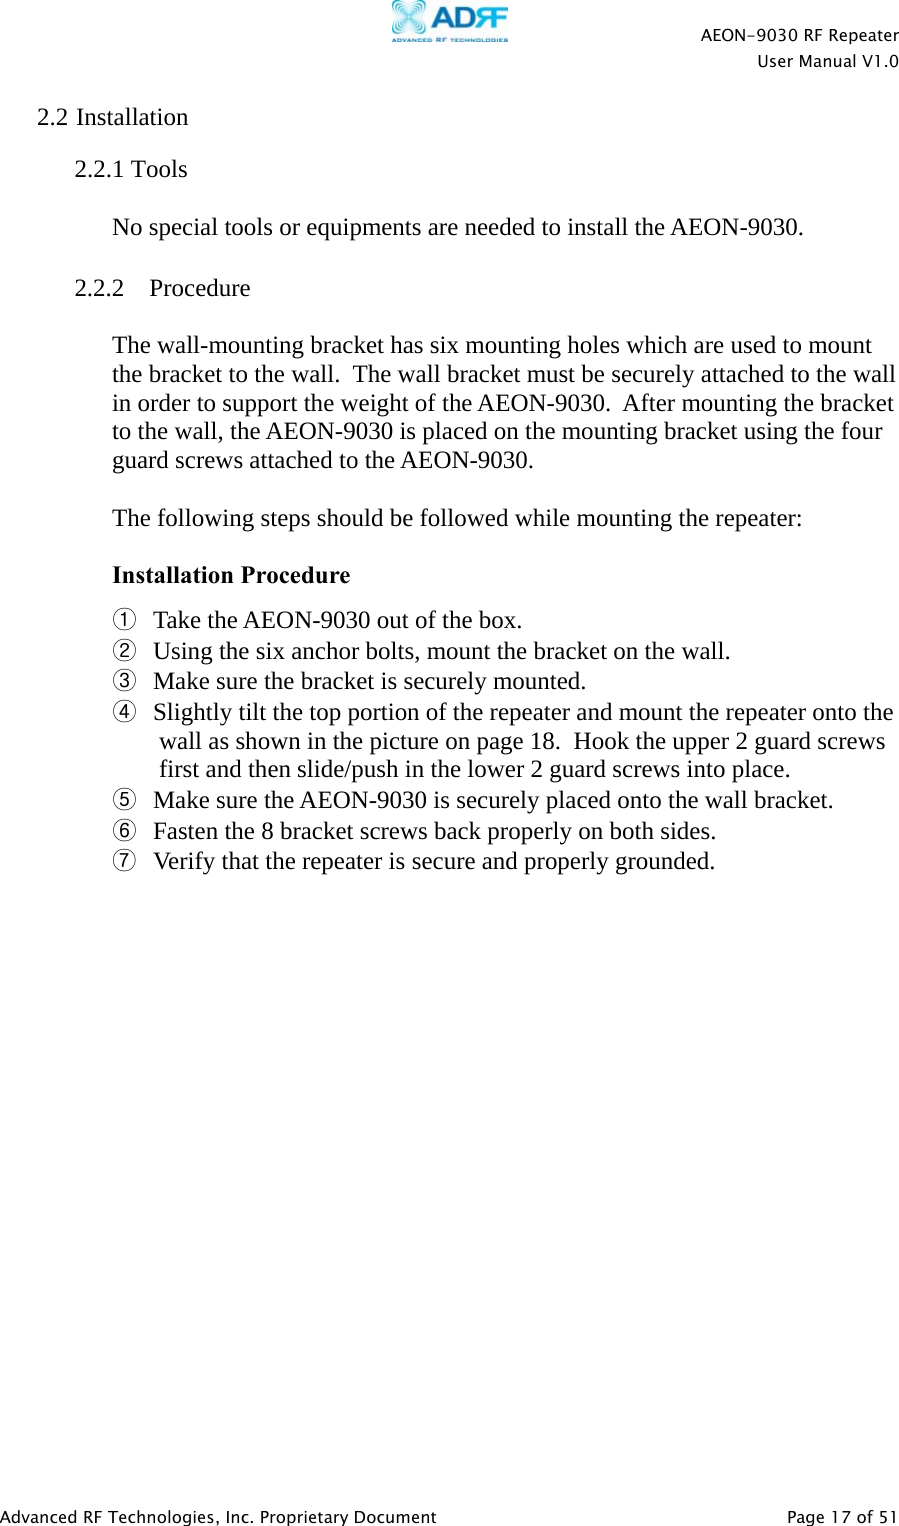    AEON-9030 RF Repeater  User Manual V1.0  Advanced RF Technologies, Inc. Proprietary Document   Page 17 of 51  2.2 Installation   2.2.1 Tools  No special tools or equipments are needed to install the AEON-9030.  2.2.2 Procedure  The wall-mounting bracket has six mounting holes which are used to mount the bracket to the wall.  The wall bracket must be securely attached to the wall in order to support the weight of the AEON-9030.  After mounting the bracket to the wall, the AEON-9030 is placed on the mounting bracket using the four guard screws attached to the AEON-9030.   The following steps should be followed while mounting the repeater:  Installation Procedure ① Take the AEON-9030 out of the box. ② Using the six anchor bolts, mount the bracket on the wall. ③ Make sure the bracket is securely mounted. ④ Slightly tilt the top portion of the repeater and mount the repeater onto the wall as shown in the picture on page 18.  Hook the upper 2 guard screws first and then slide/push in the lower 2 guard screws into place. ⑤ Make sure the AEON-9030 is securely placed onto the wall bracket. ⑥ Fasten the 8 bracket screws back properly on both sides. ⑦ Verify that the repeater is secure and properly grounded.  